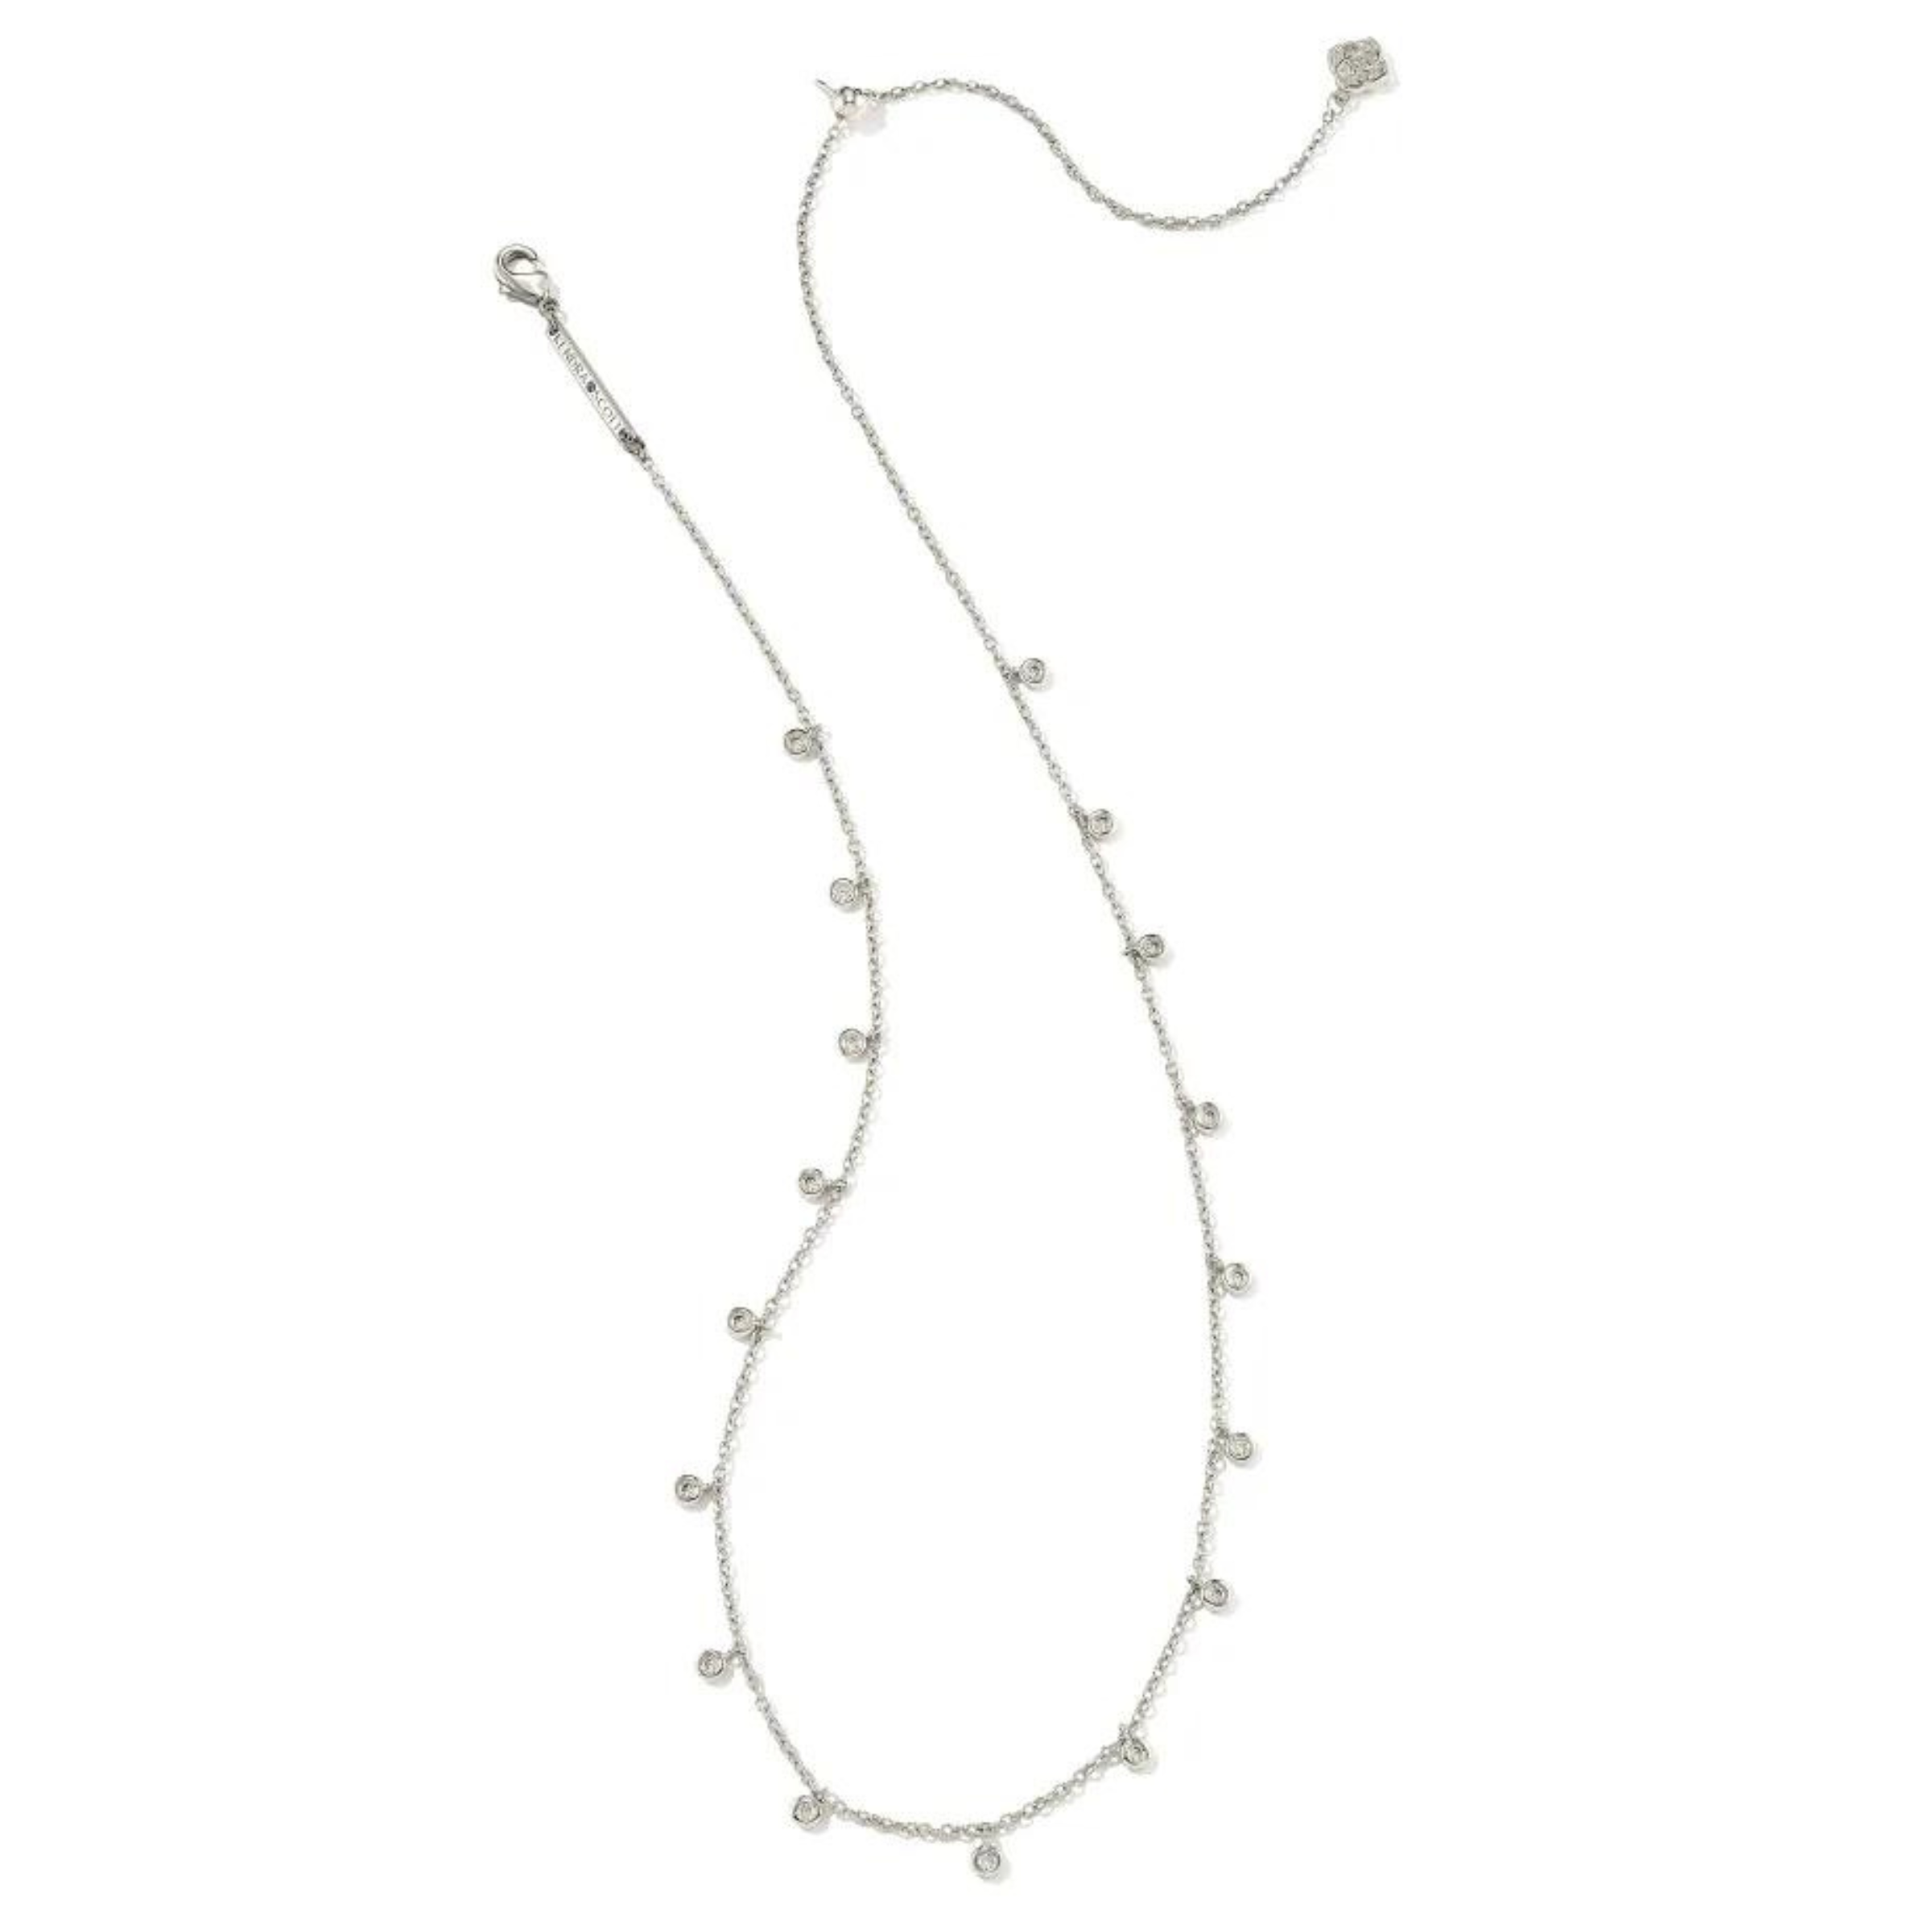 Kendra Scott | Amelia Chain Necklace in Silver - Giddy Up Glamour Boutique